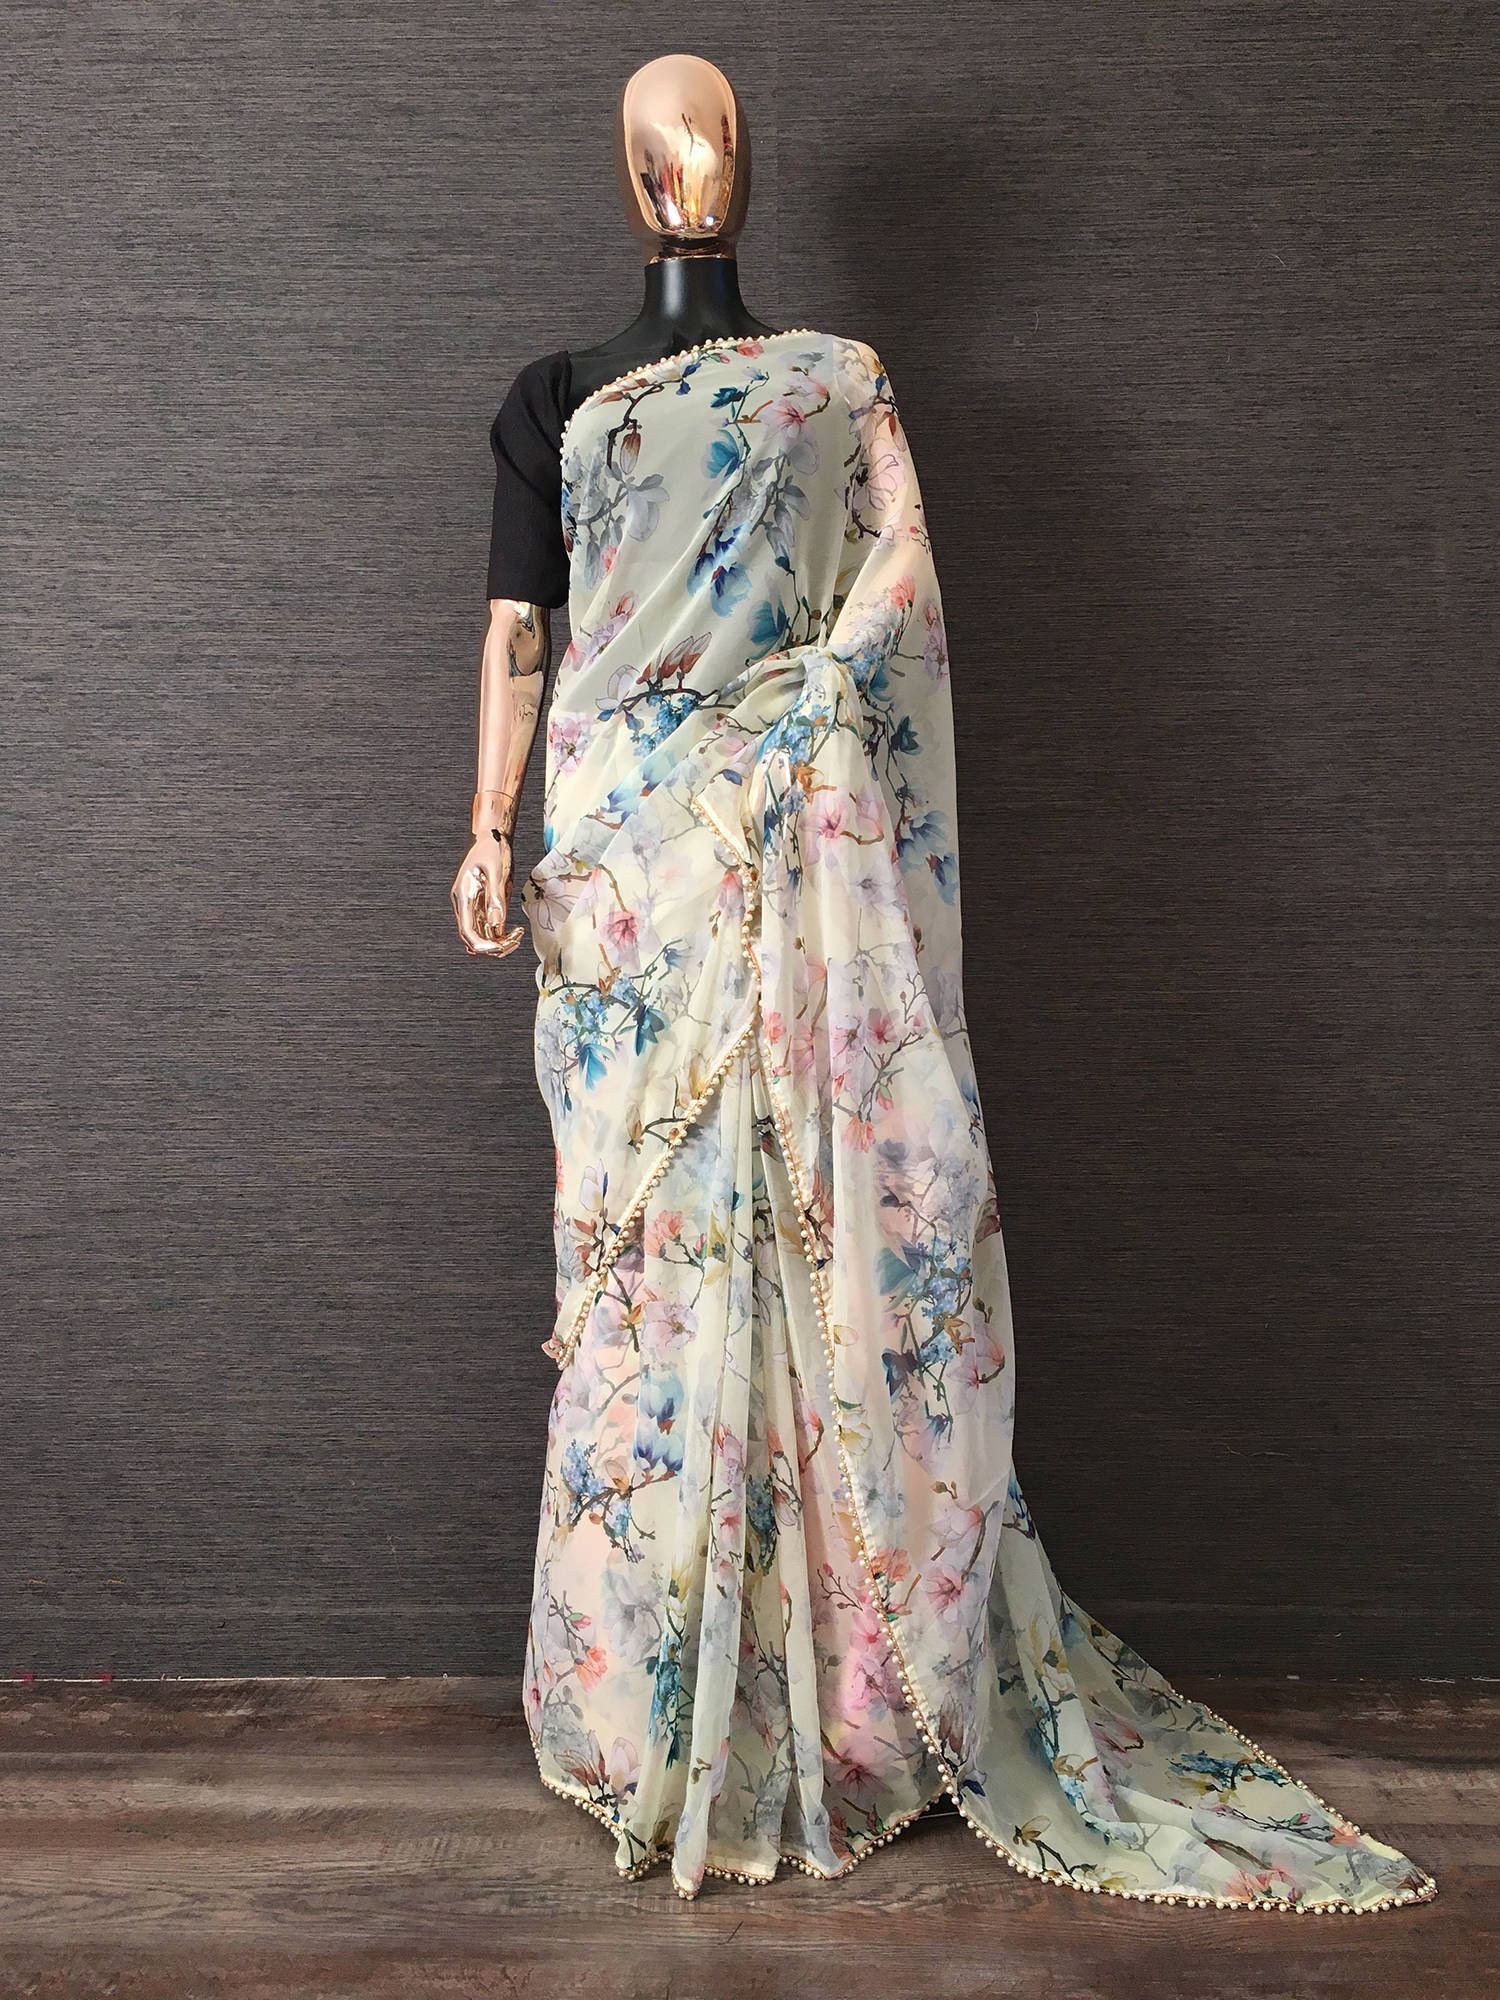 Off White Digital Printed Party Wear Saree With Blouse